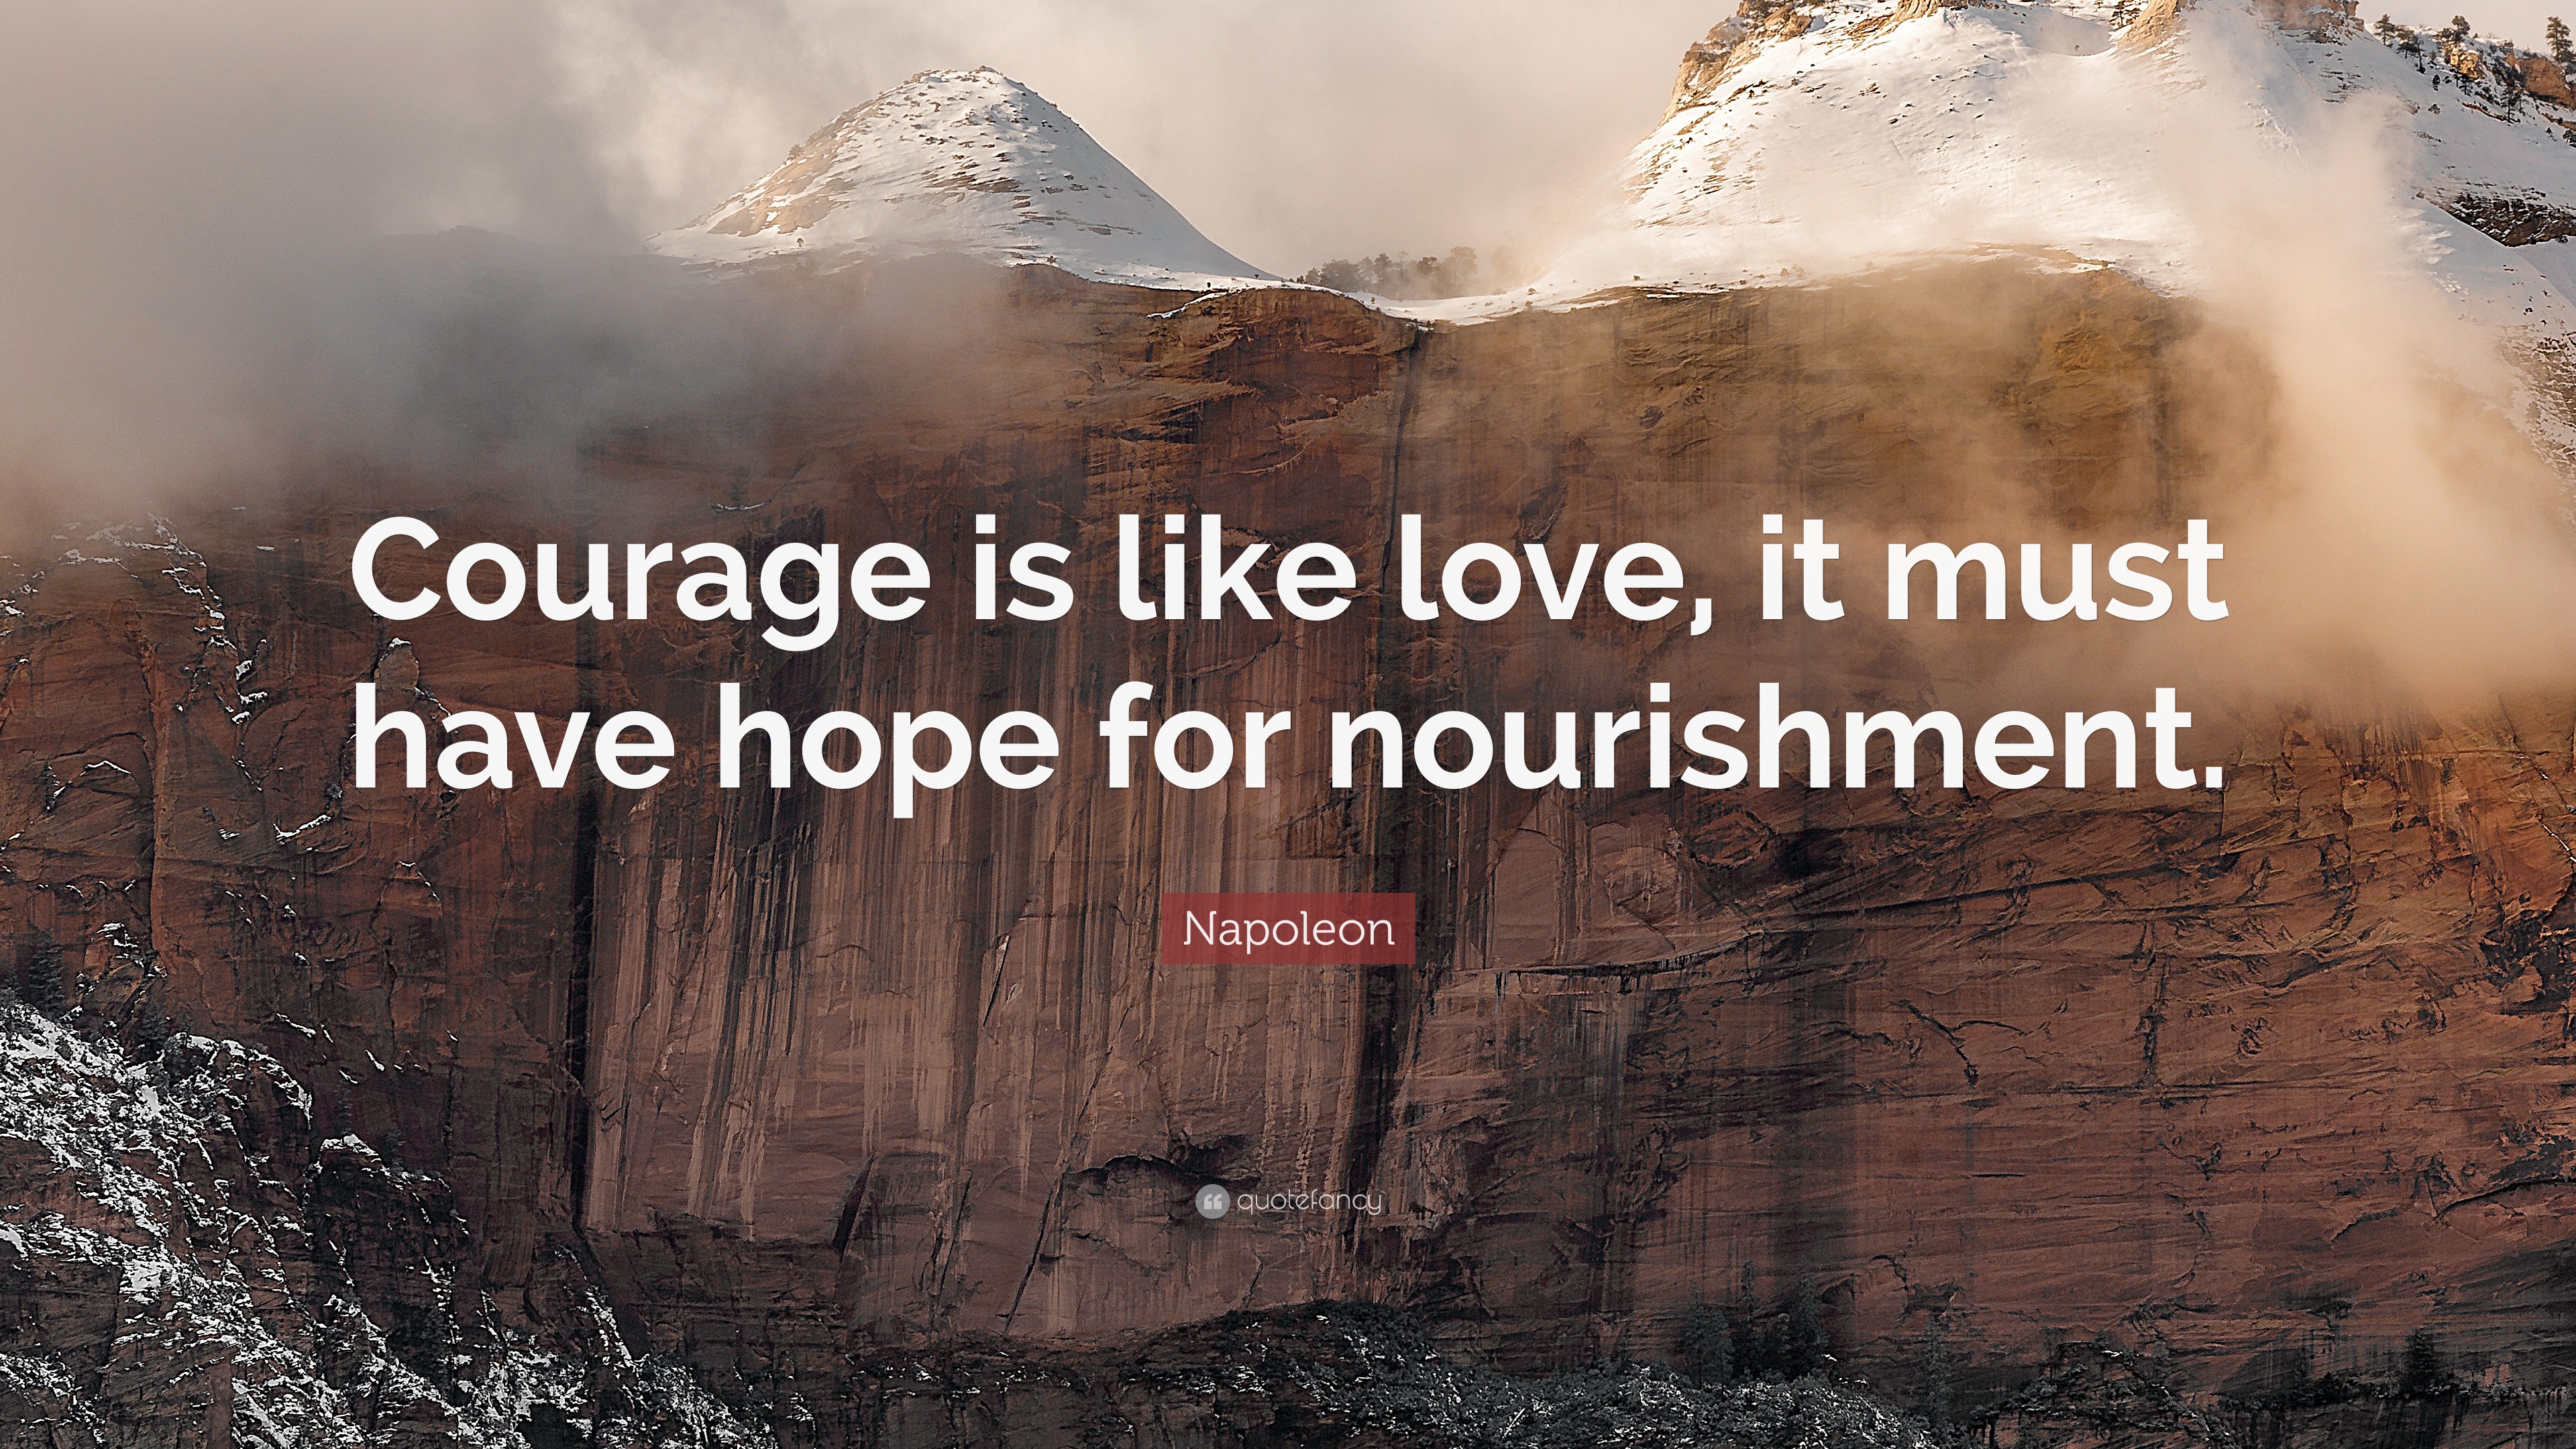 Napoleon Quote: “Courage is like love, it must have hope for nourishment.”